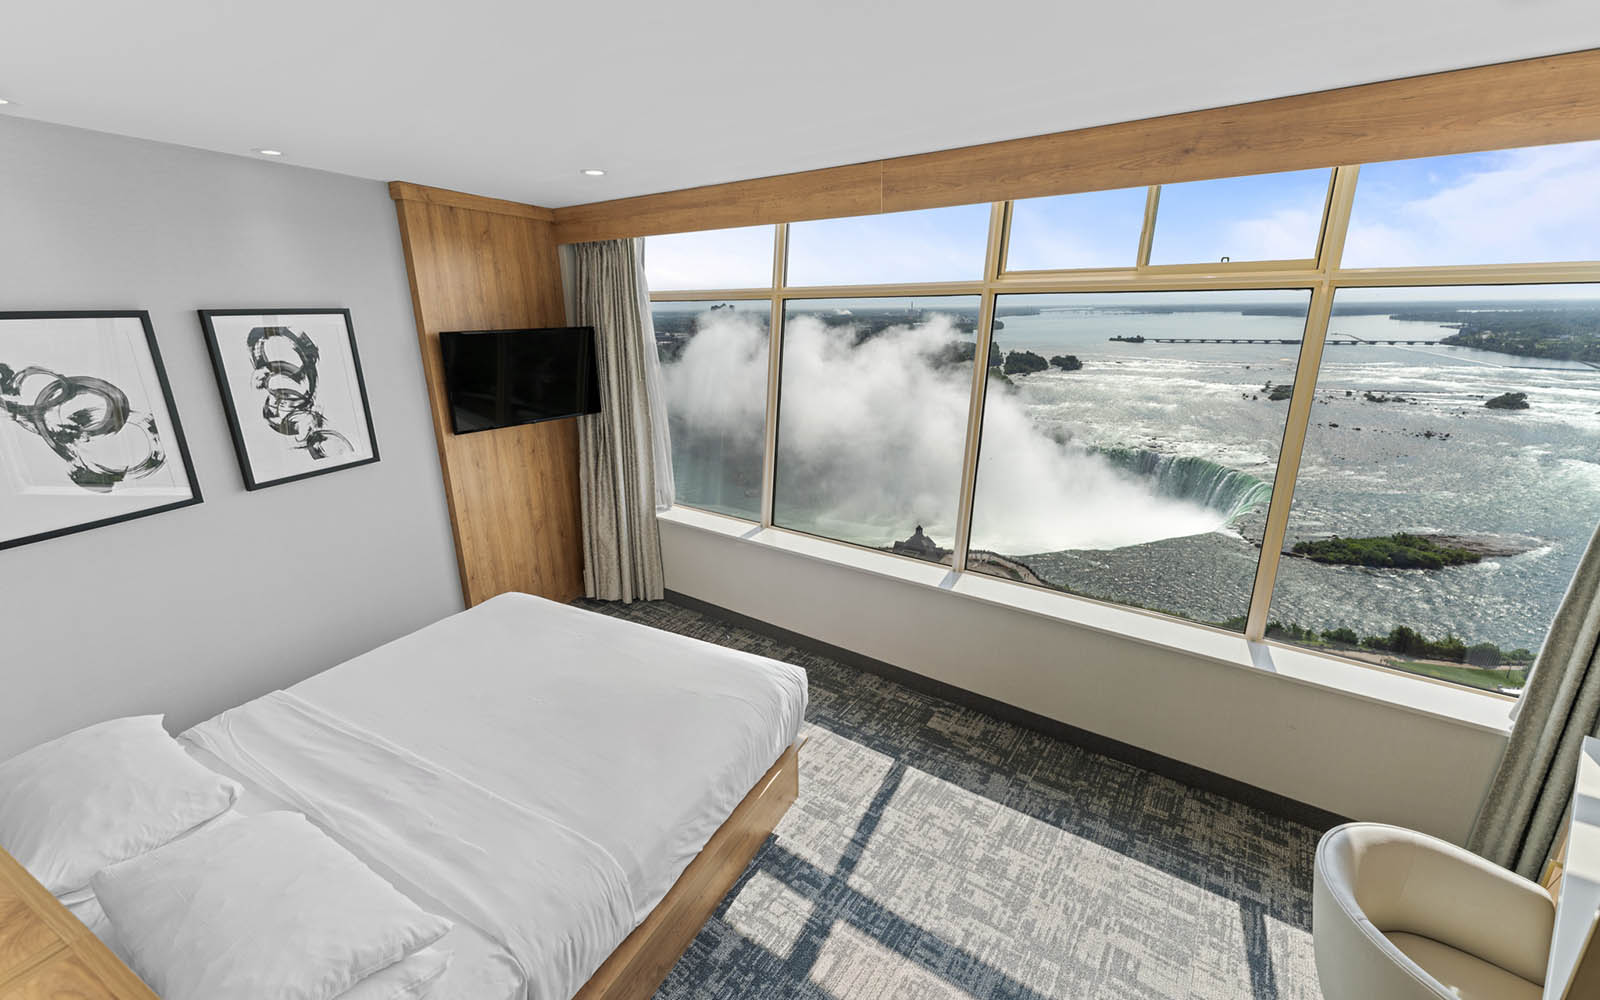 Hotel room with King Bed with white linens, expansive window offering scenic views of Niagara Falls